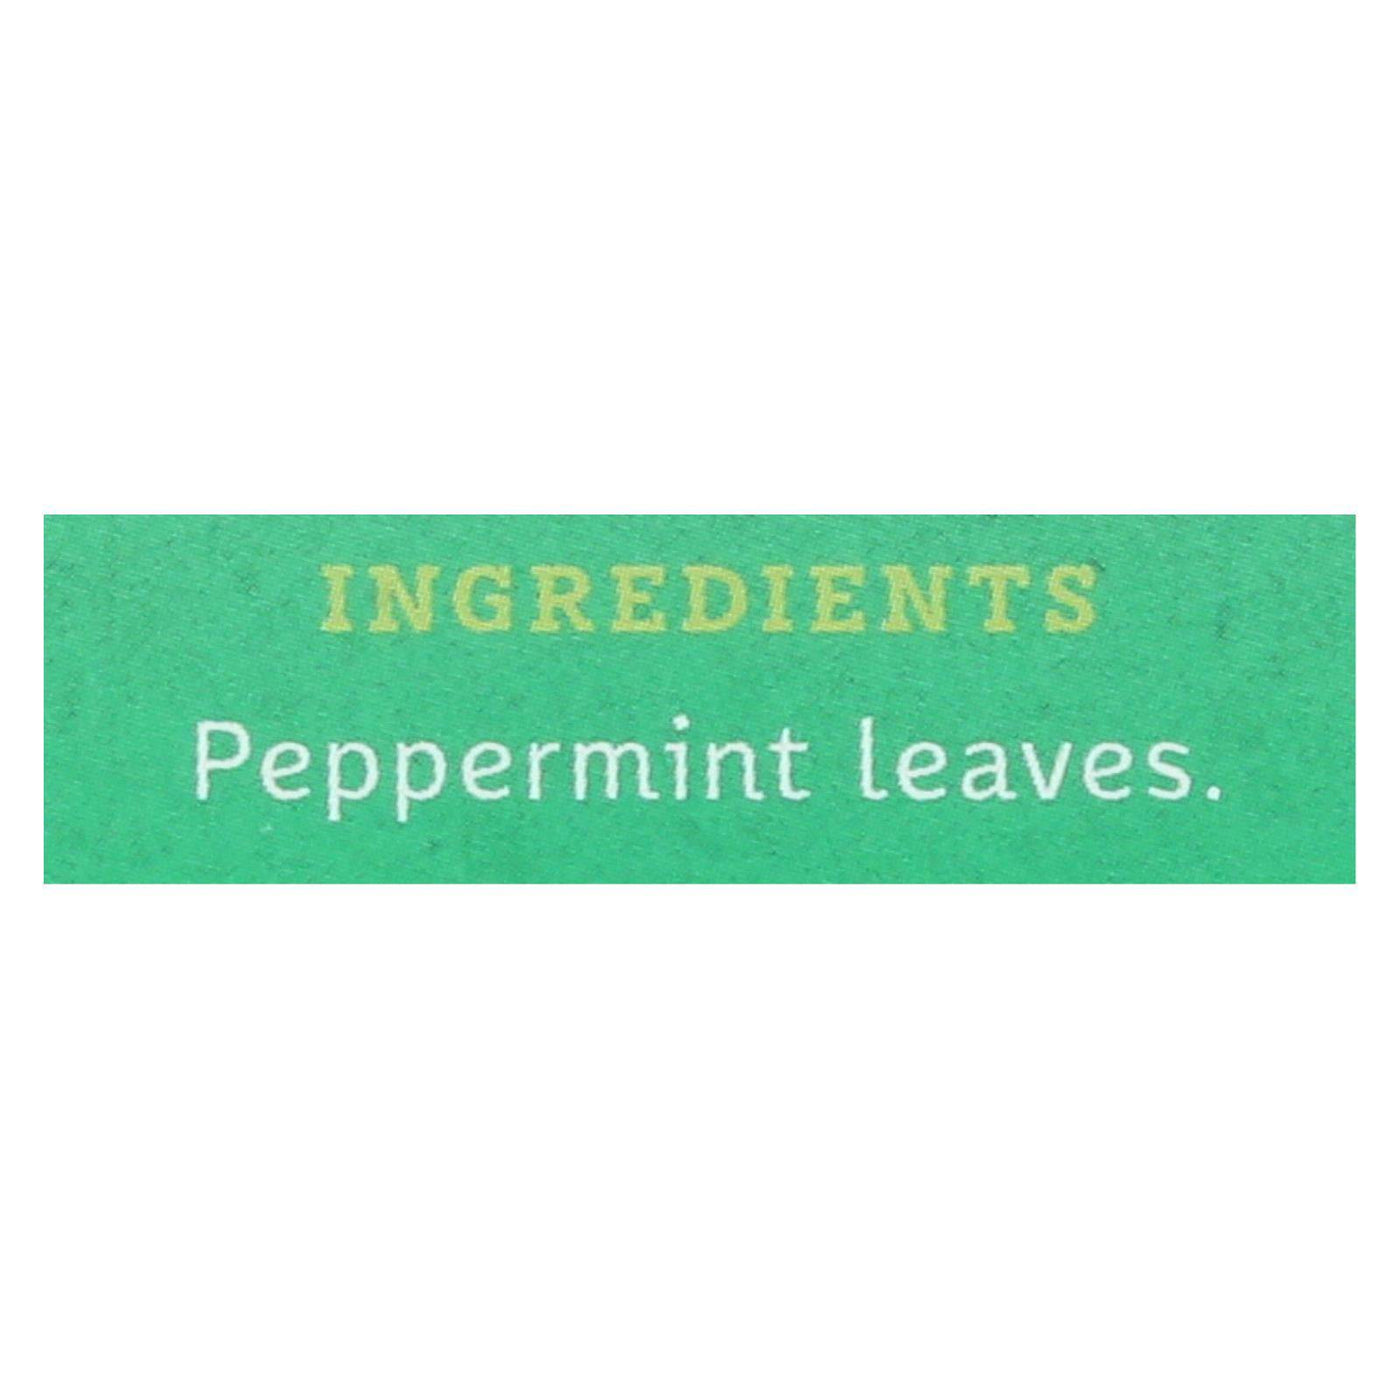 Stash Tea - Herbal - Peppermint - 20 Bags - Case Of 6 | OnlyNaturals.us